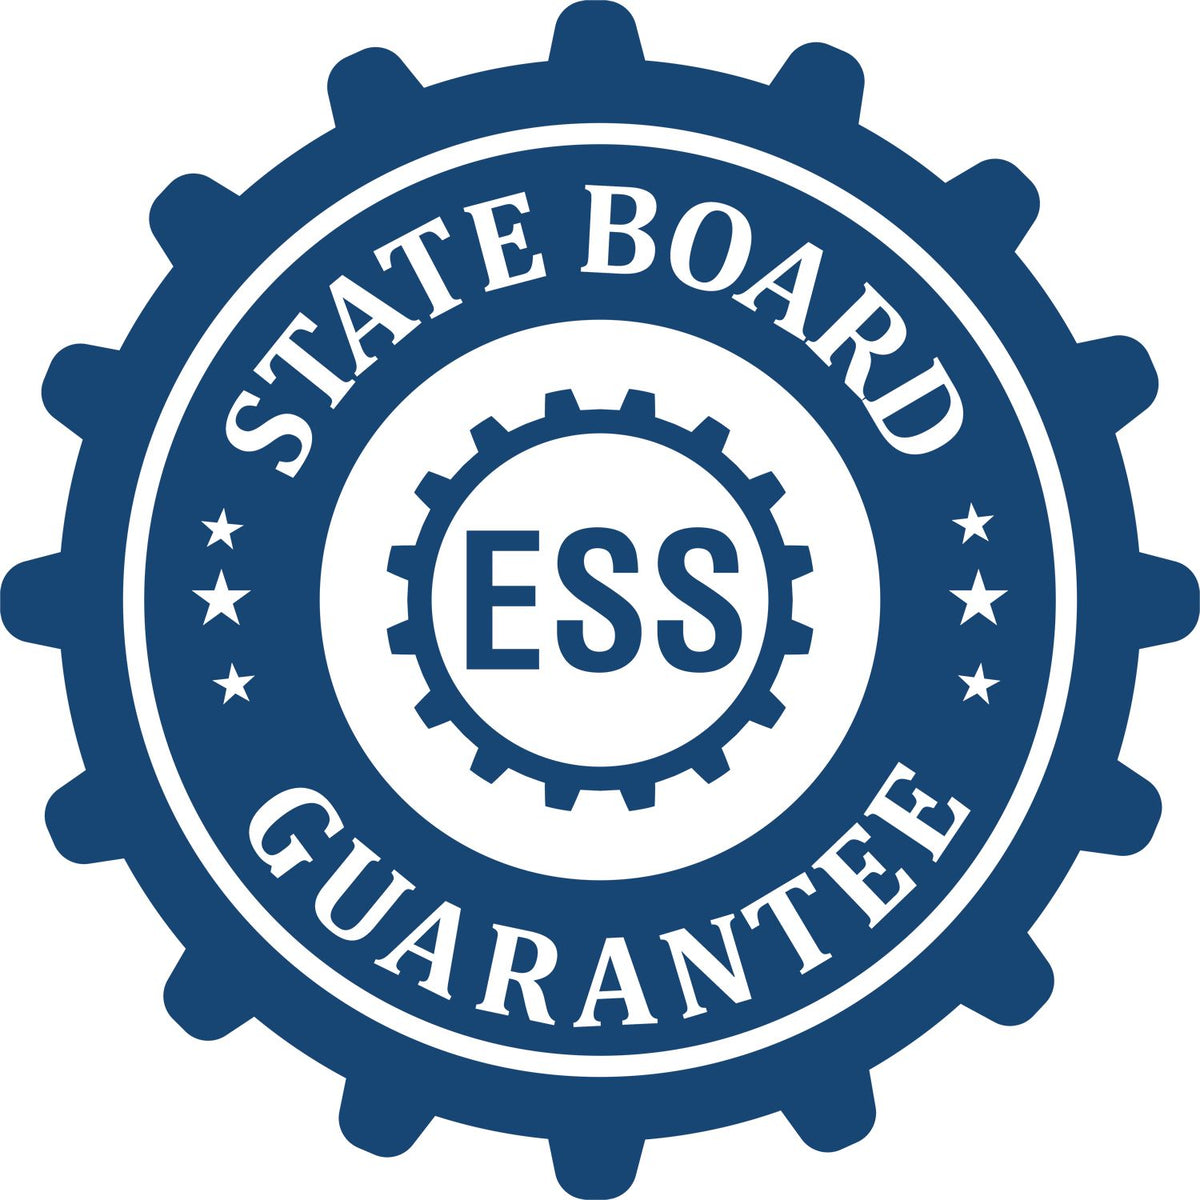 An emblem in a gear shape illustrating a state board guarantee for the Pennsylvania Landscape Architectural Seal Stamp product.